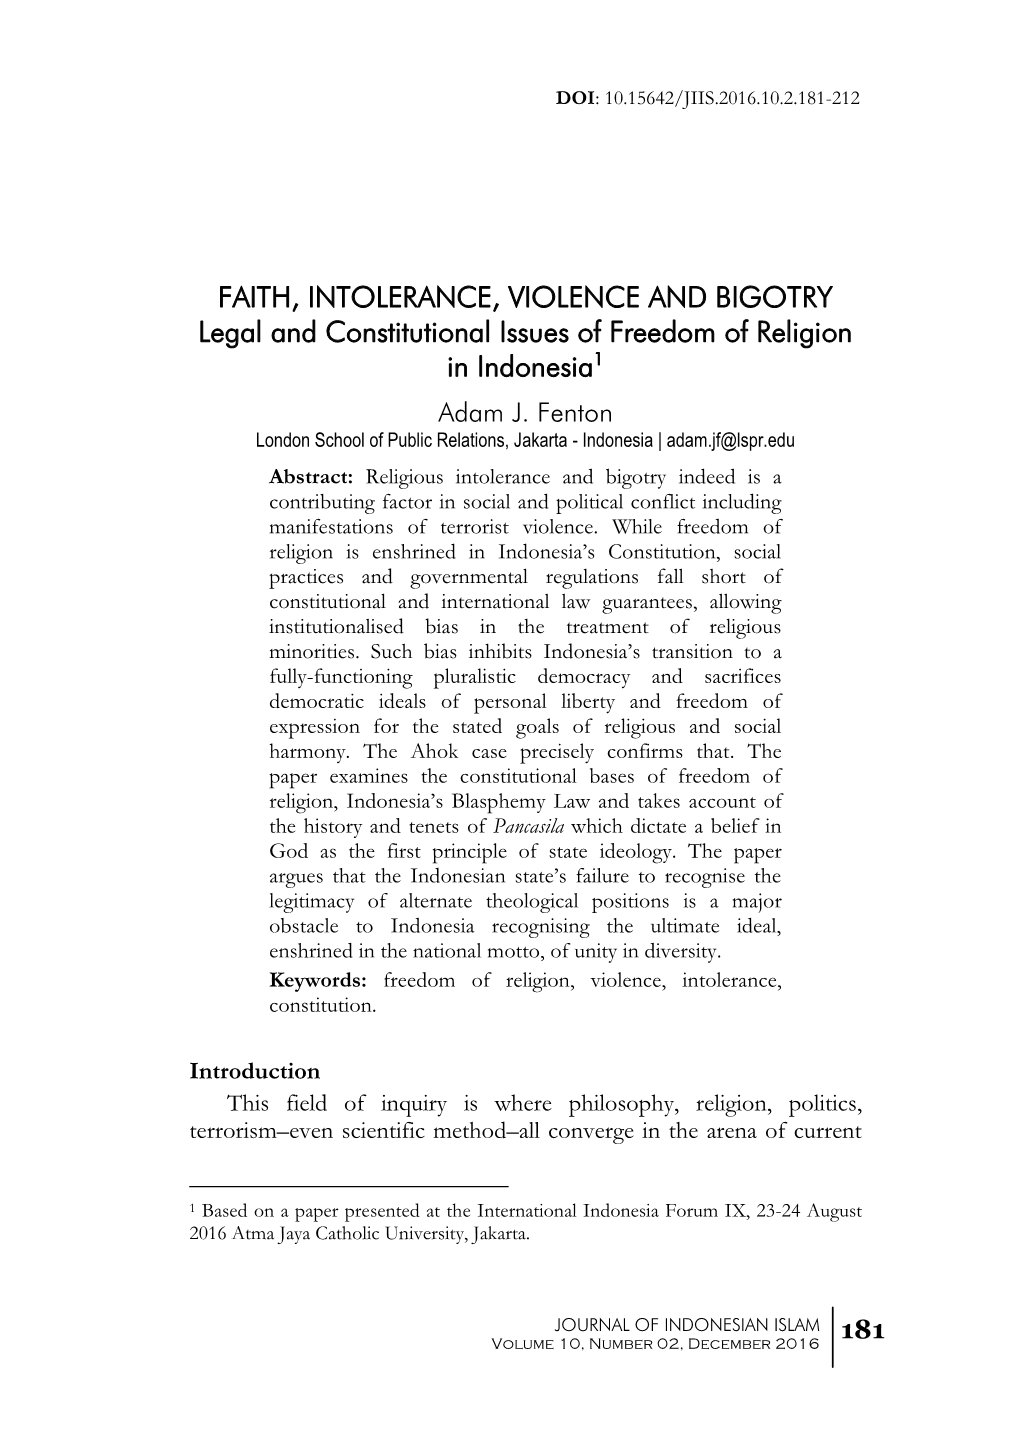 FAITH, INTOLERANCE, VIOLENCE and BIGOTRY Legal and Constitutional Issues of Freedom of Religion in Indonesia1 Adam J